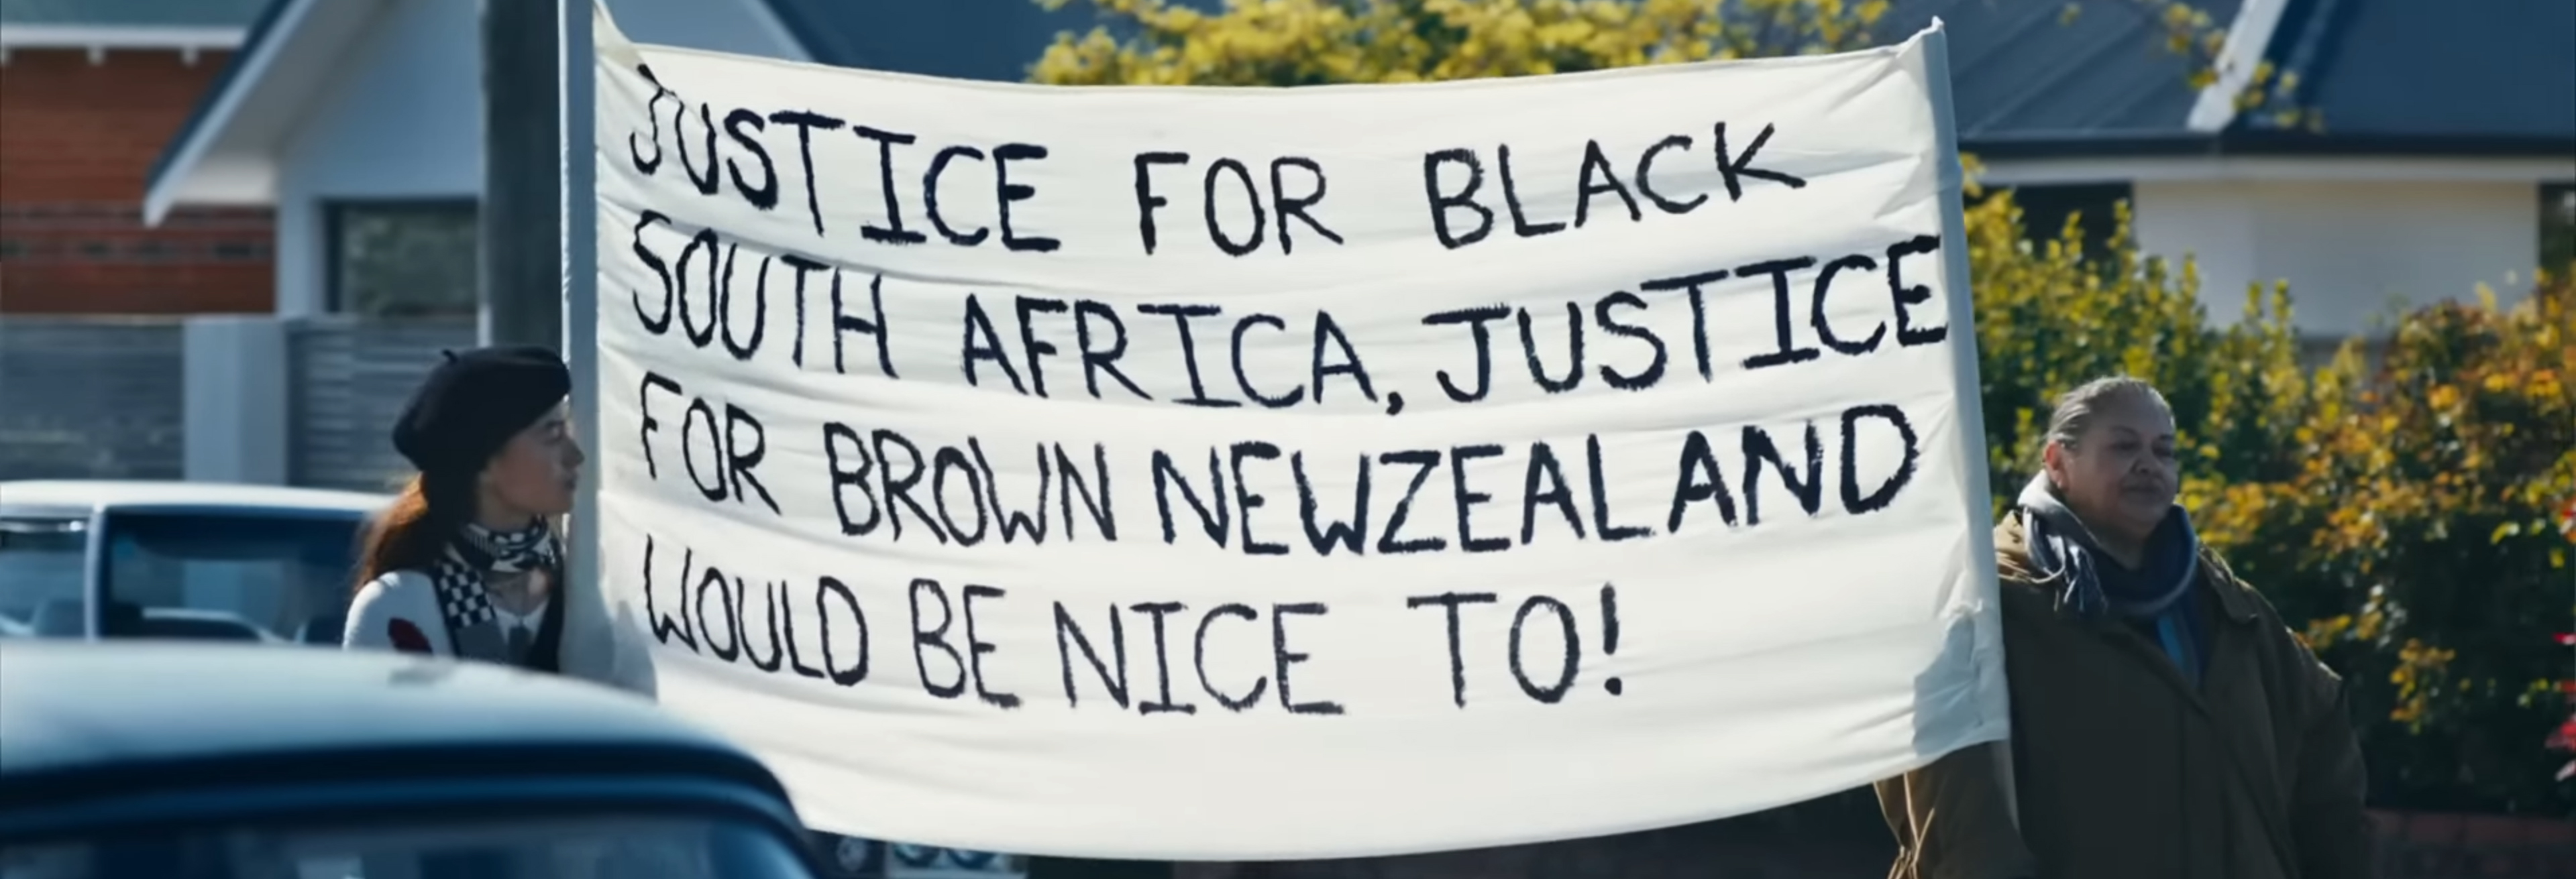 A sign that says "Justice for Black South Africa, Justice for Brown New Zealand would be nice to!"